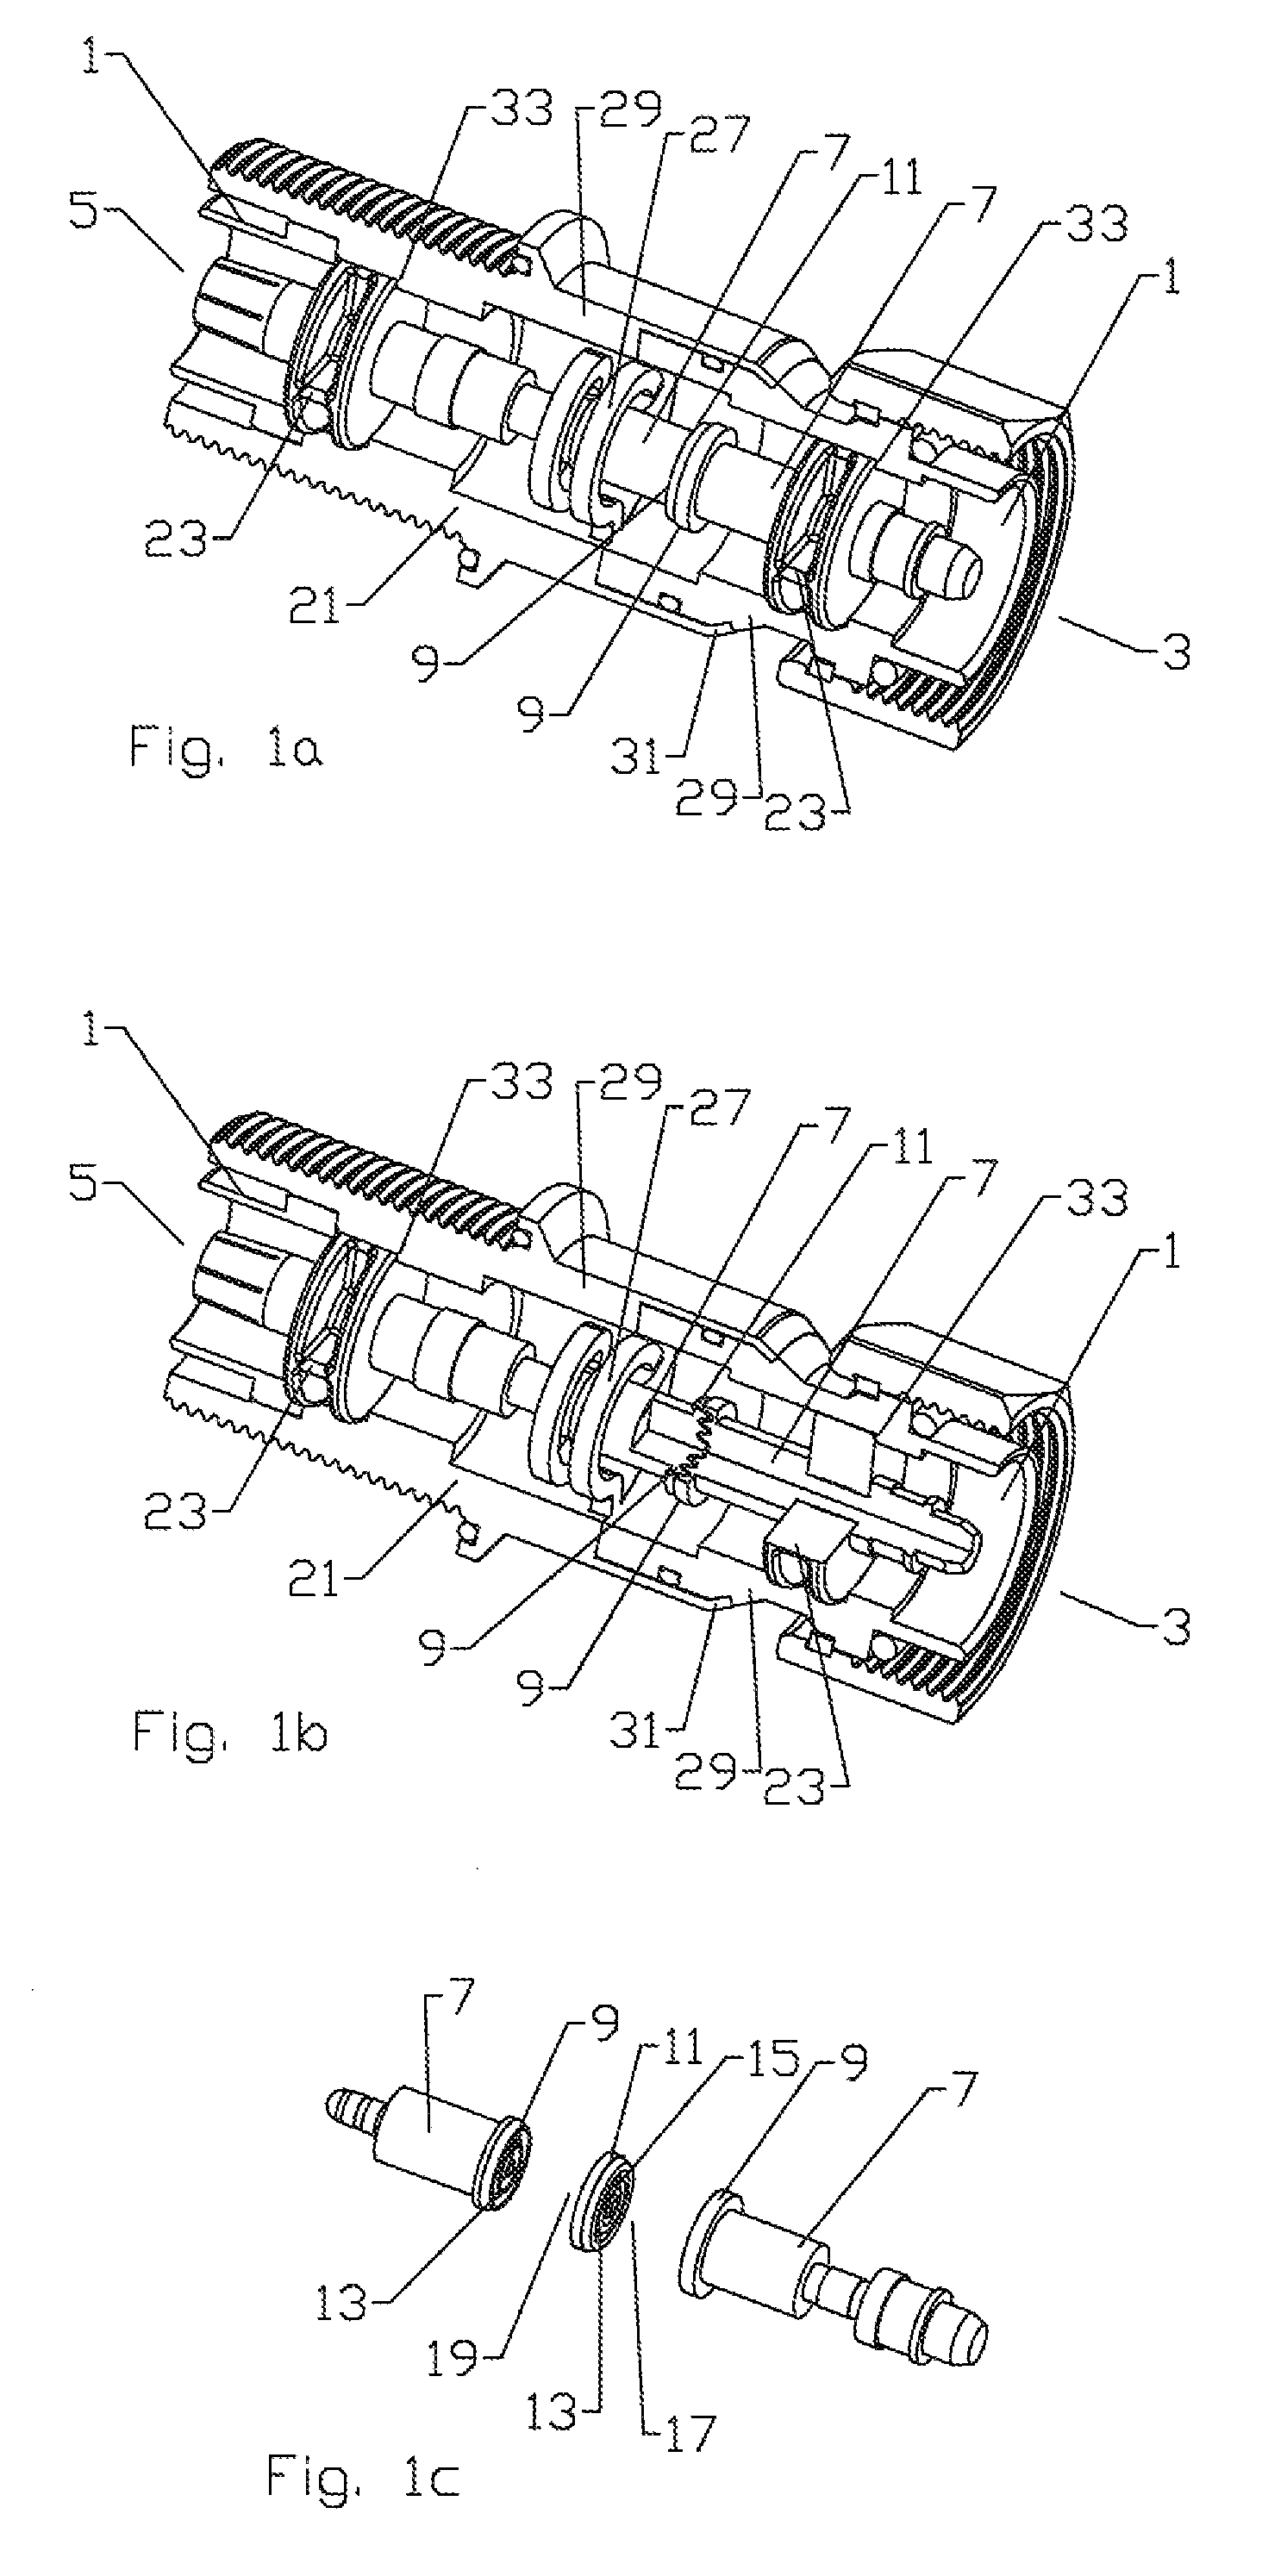 Folded surface capacitor in-line assembly